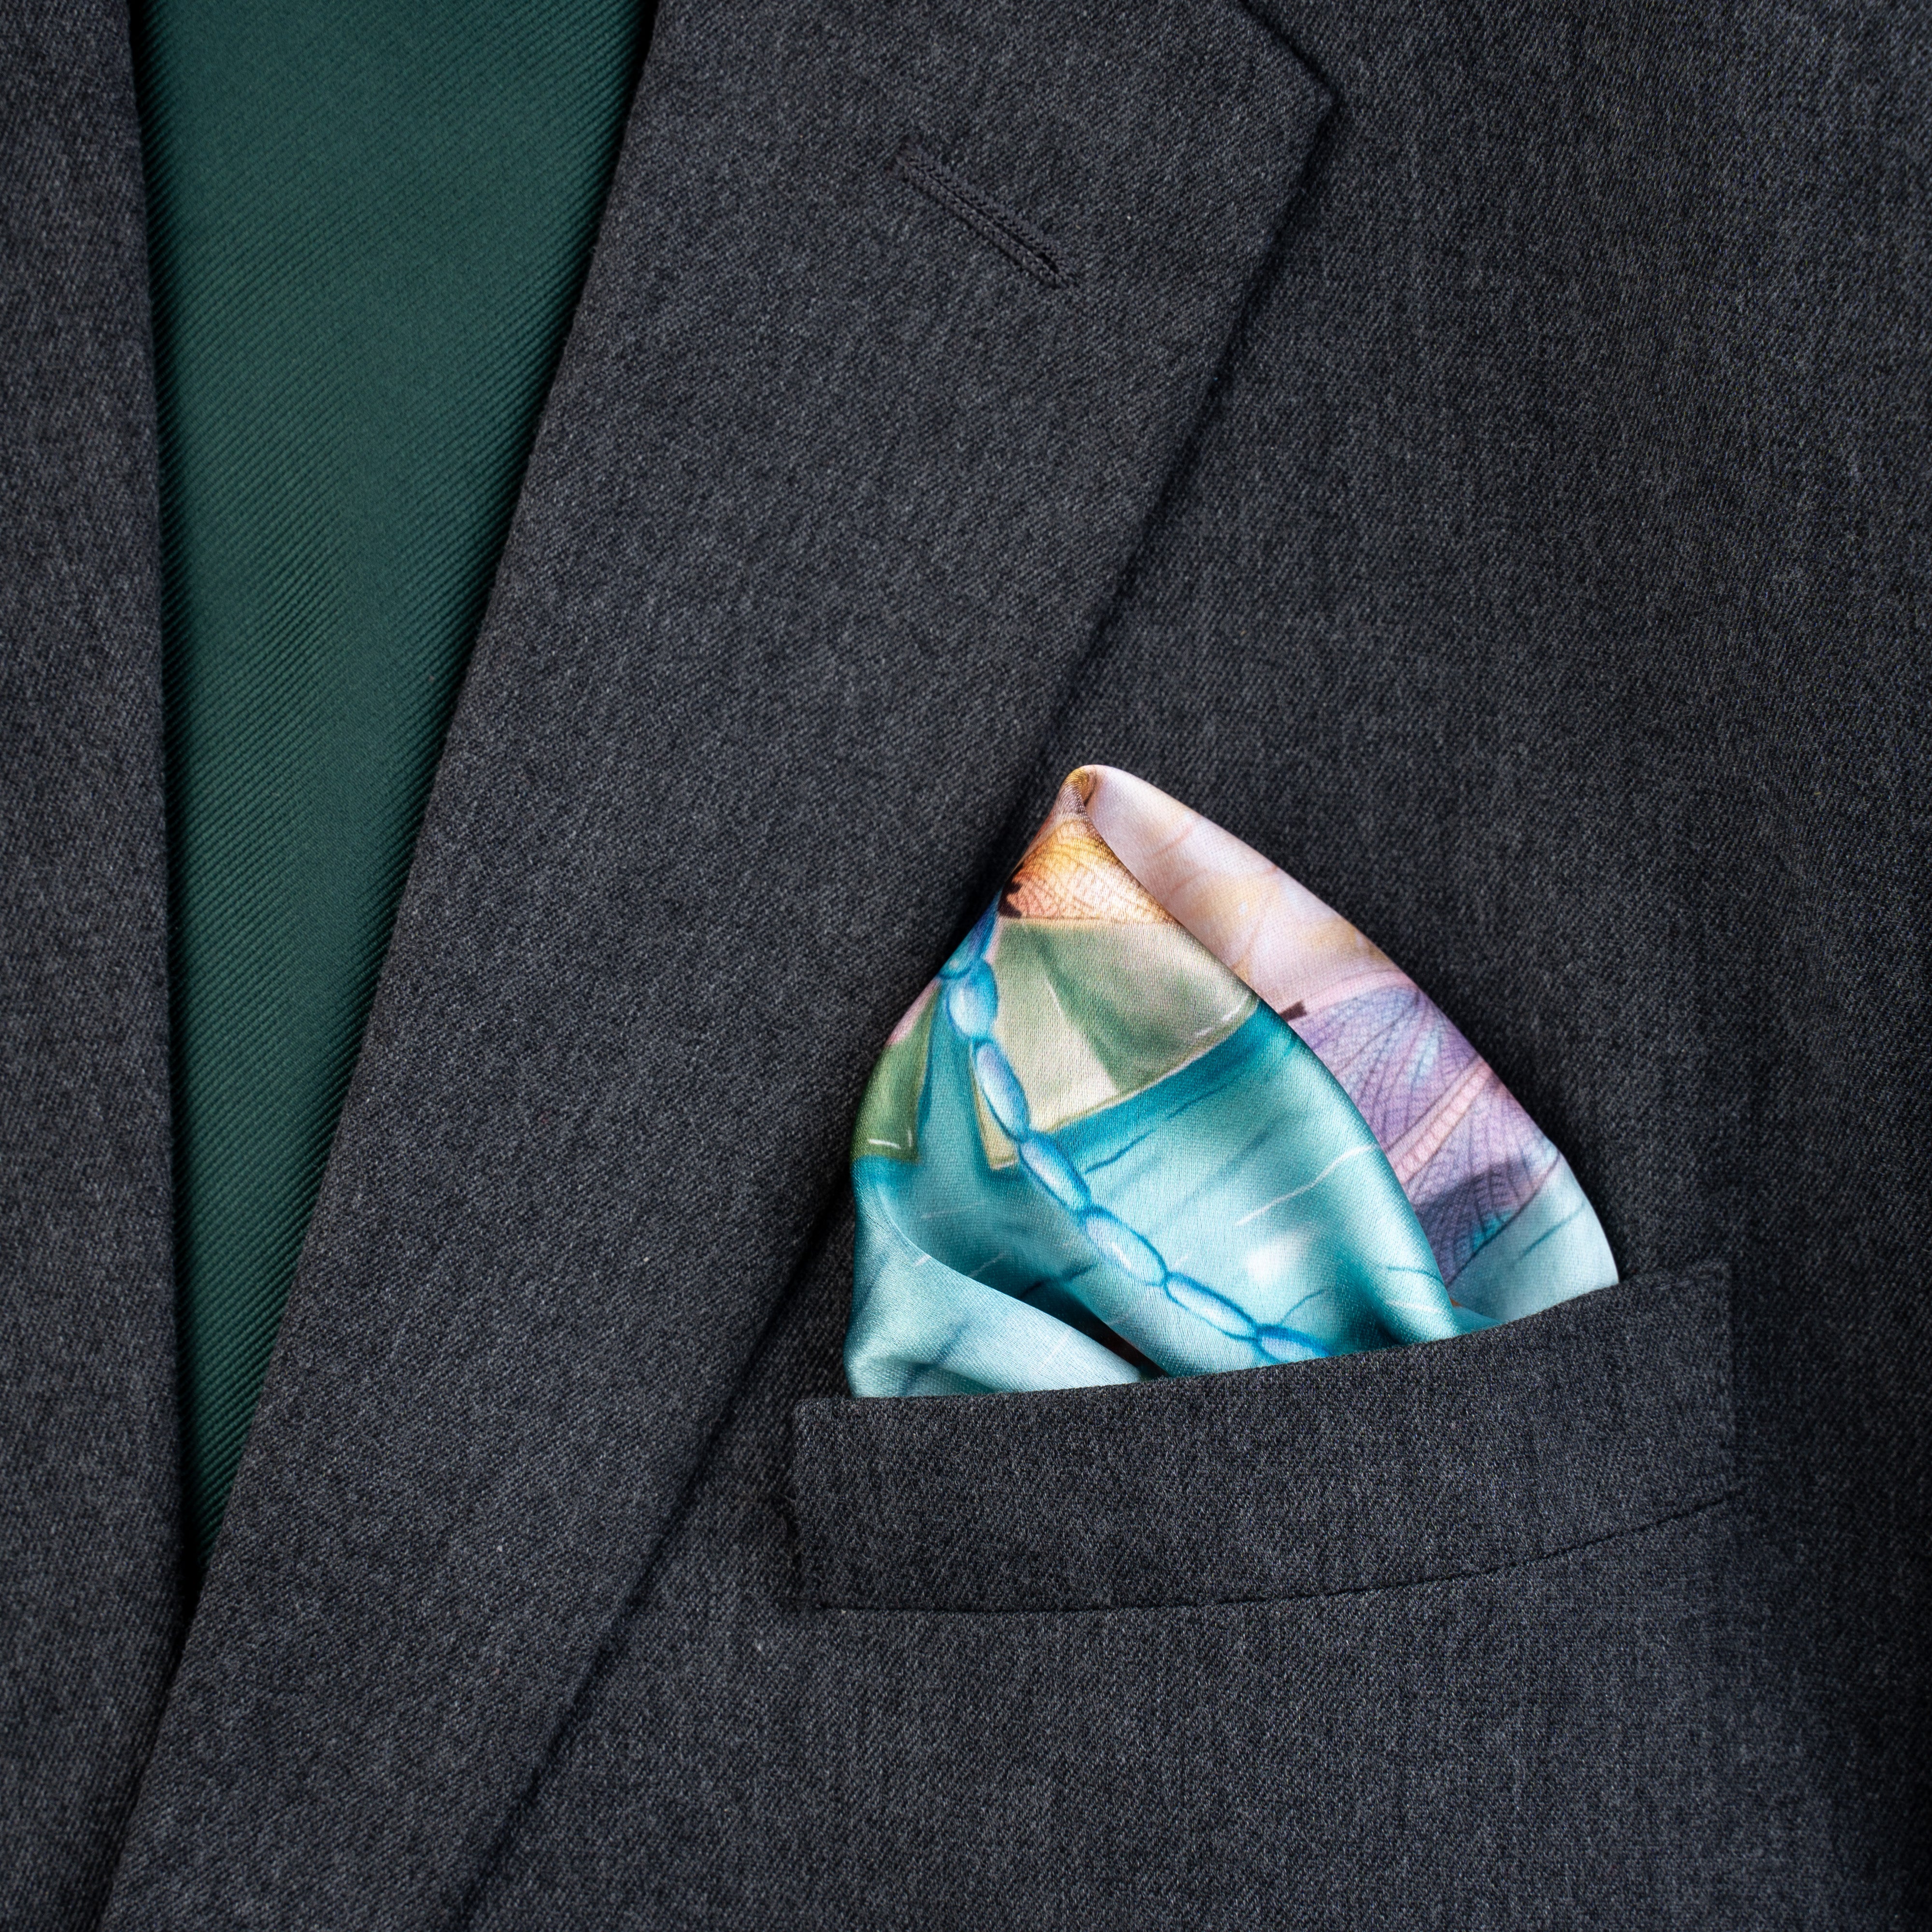 Pocket Square - The Water Tale of Dragonflies